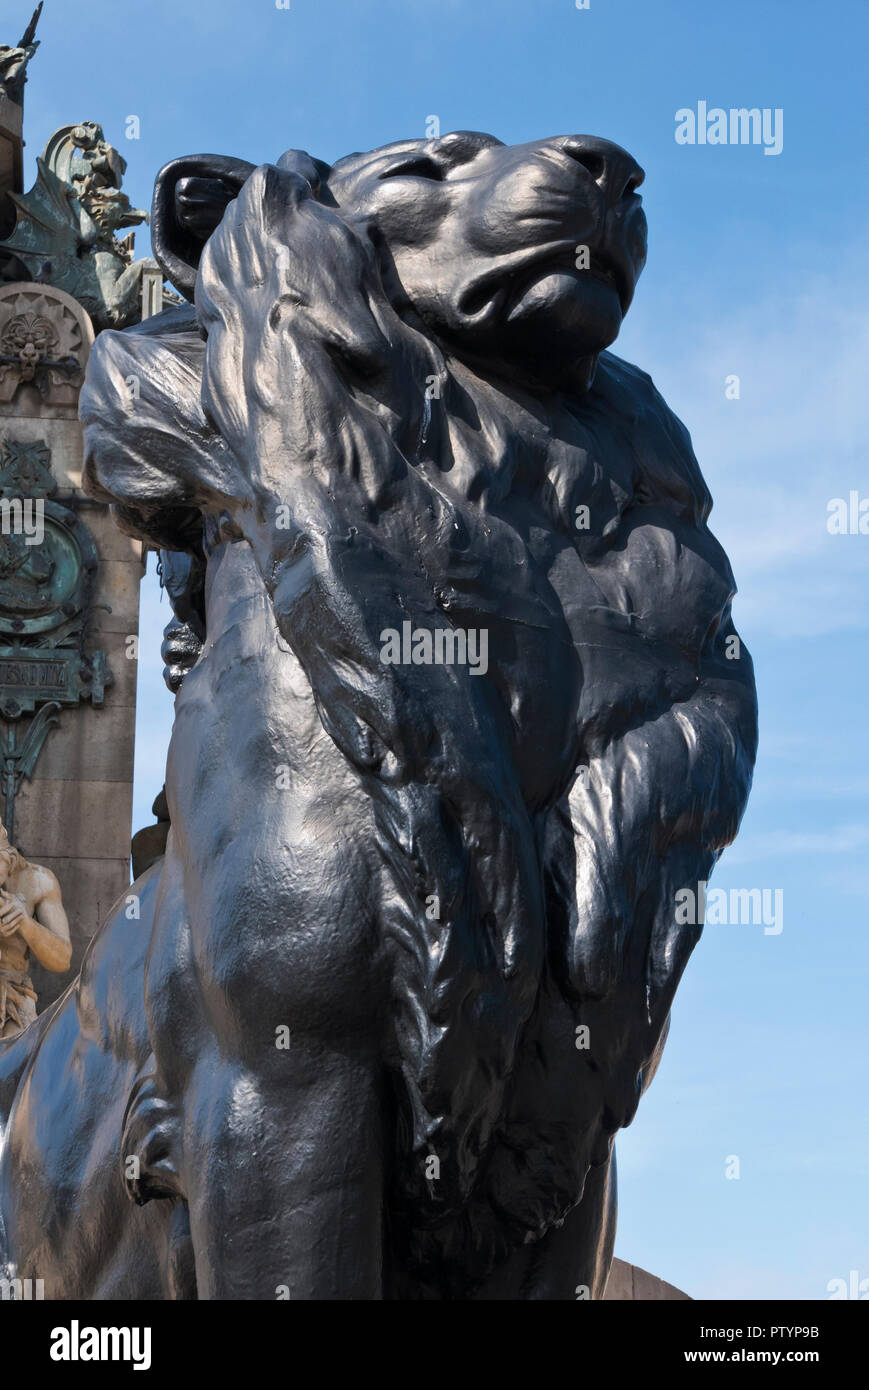 A lion statue as part of the Christopher Columbus monument, Barcelona, Spain Stock Photo